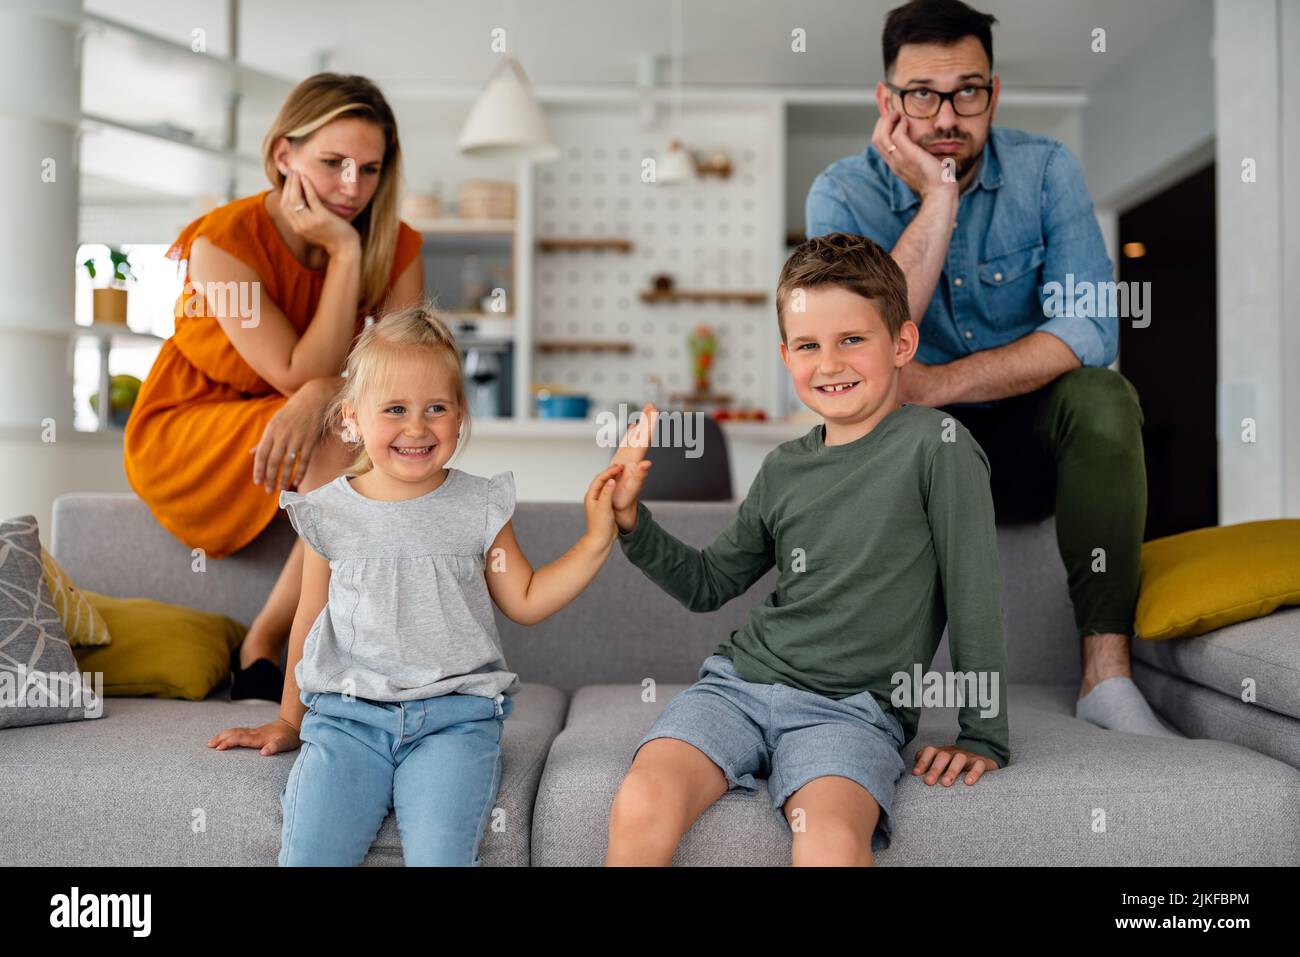 Tired parents sitting on couch feels annoyed exhausted while happy children playing together. Stock Photo